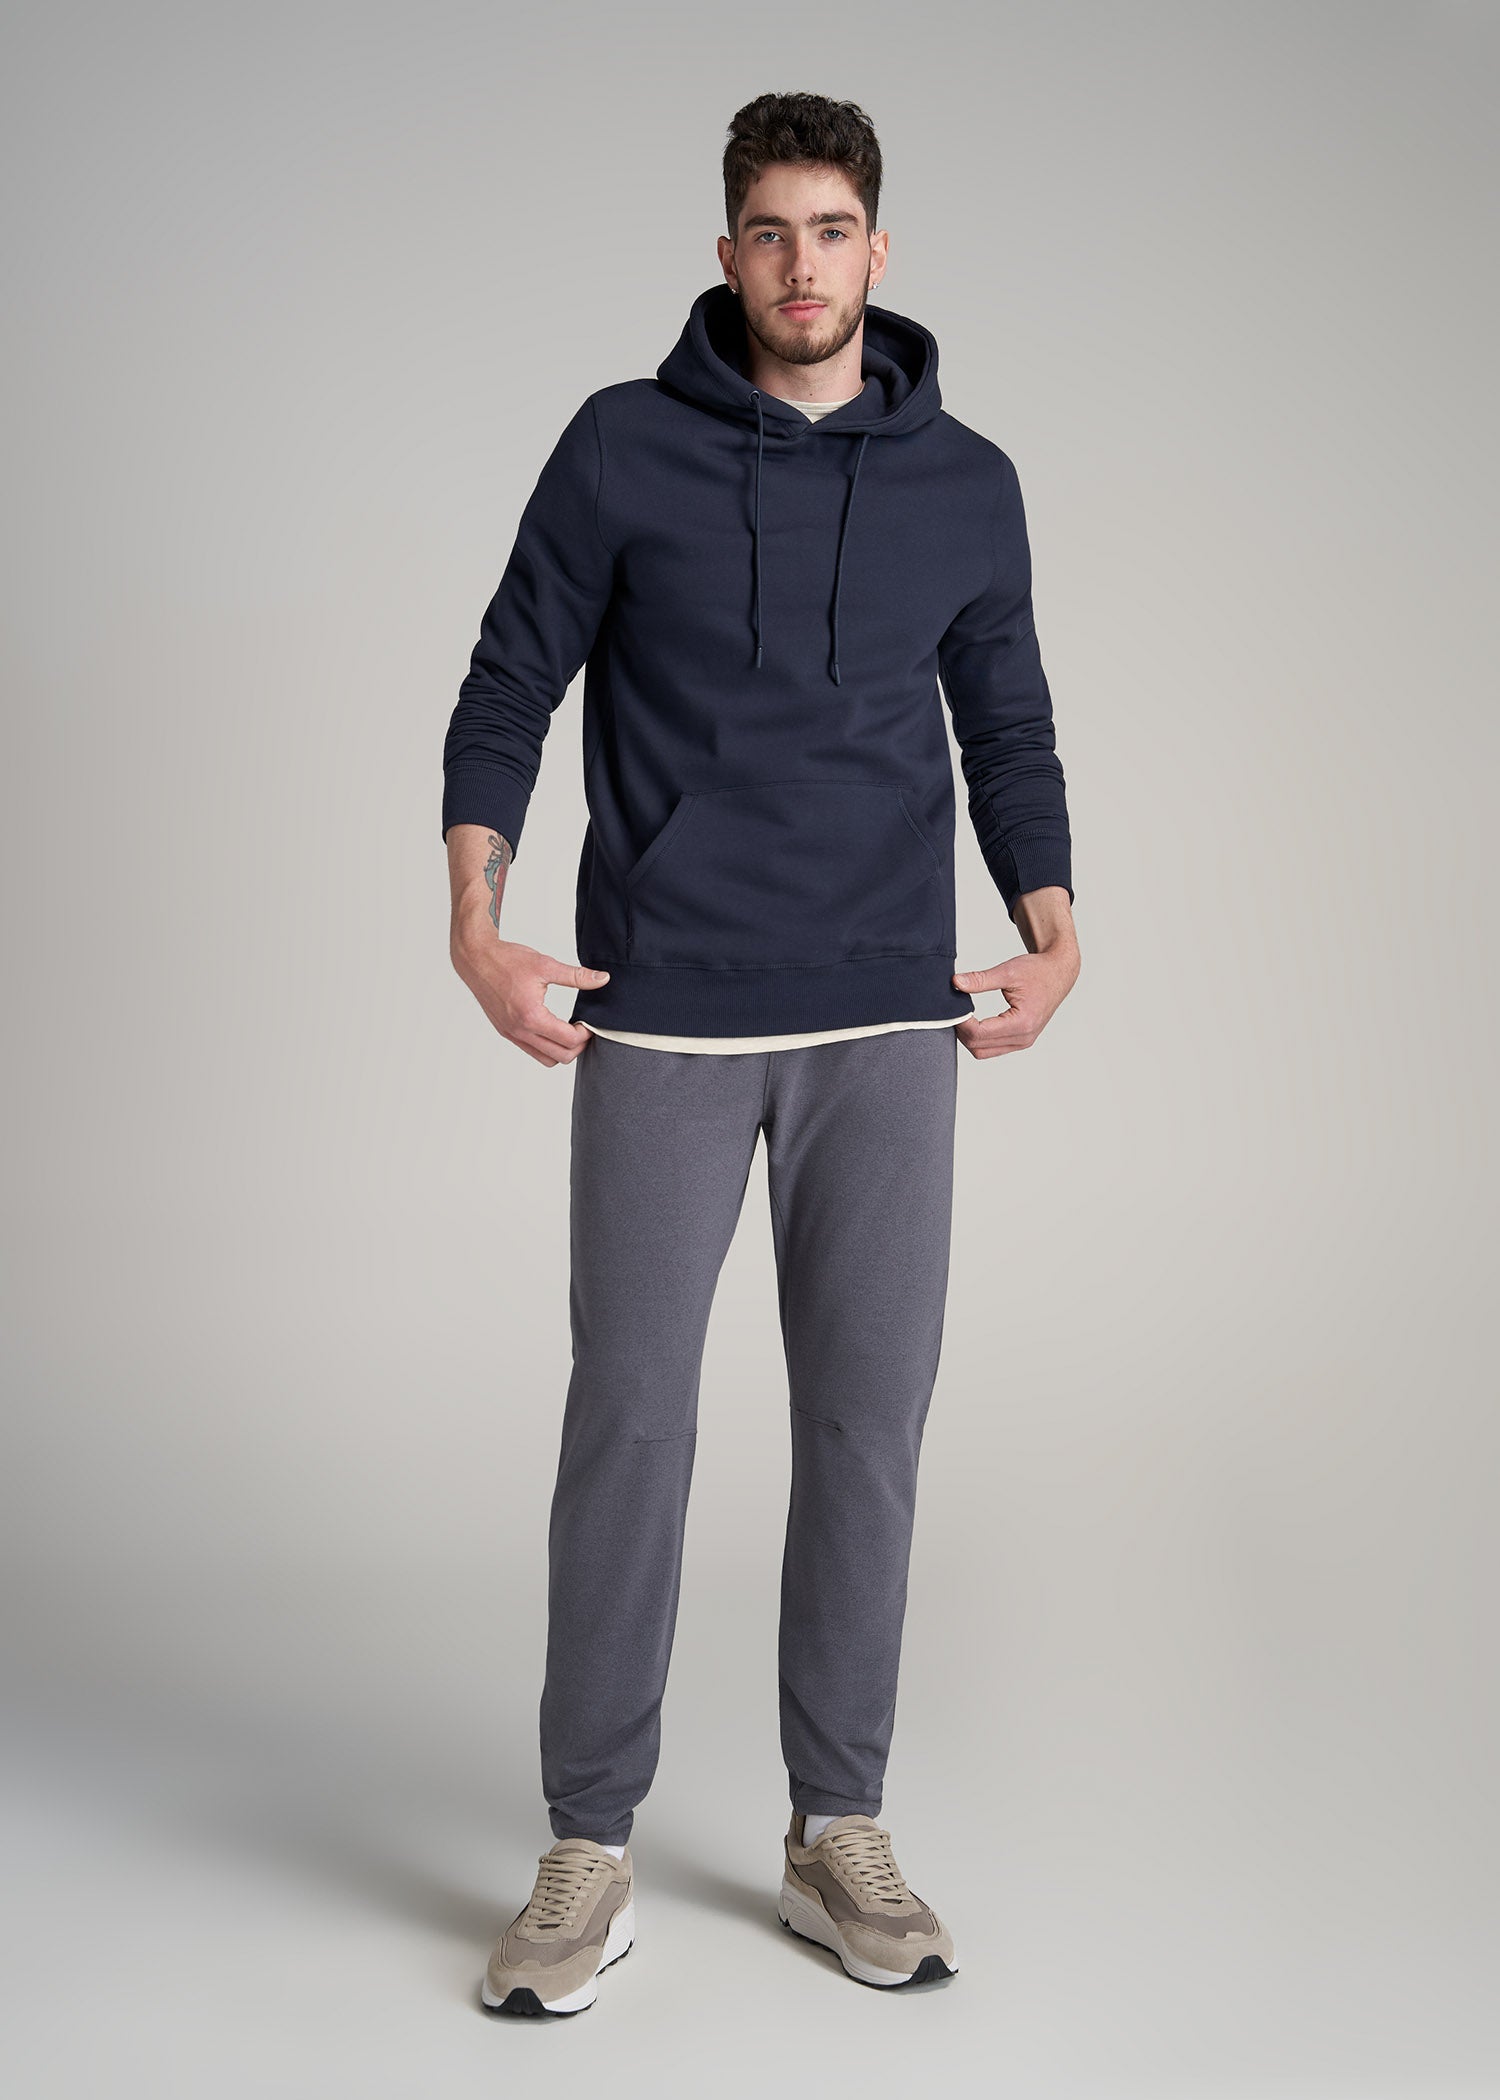 AT PERFORMANCE FRENCH TERRY SWEATPANTS FOR TALL MEN IN TECH CHARCOAL MIX